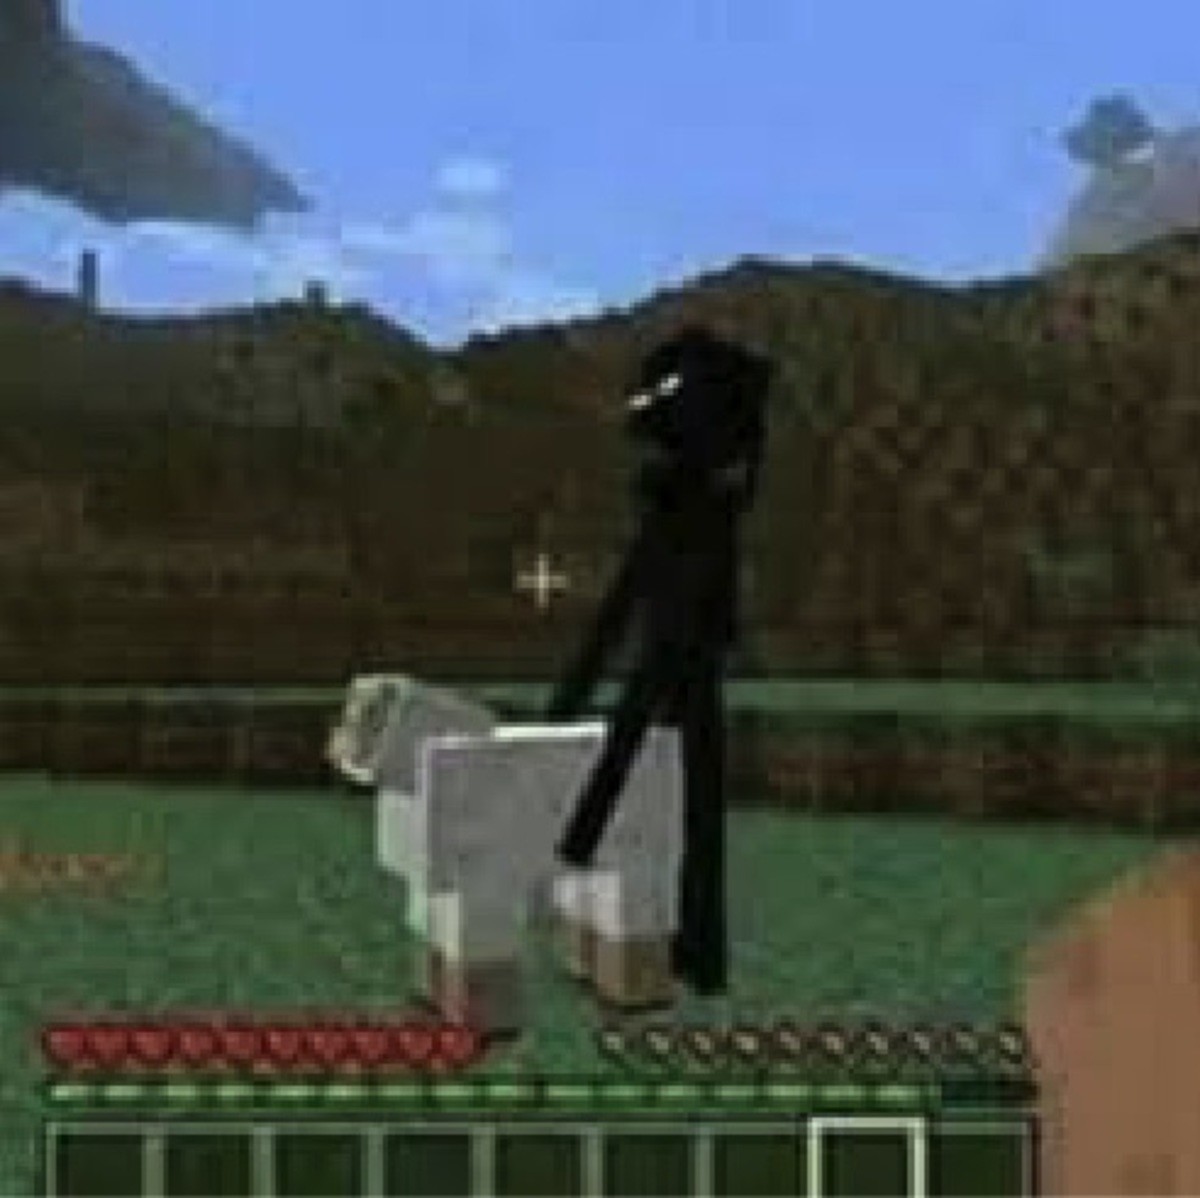 My dad told me to stop screaming or he'll go get the belt. .. I didn’t know endermen were welsh